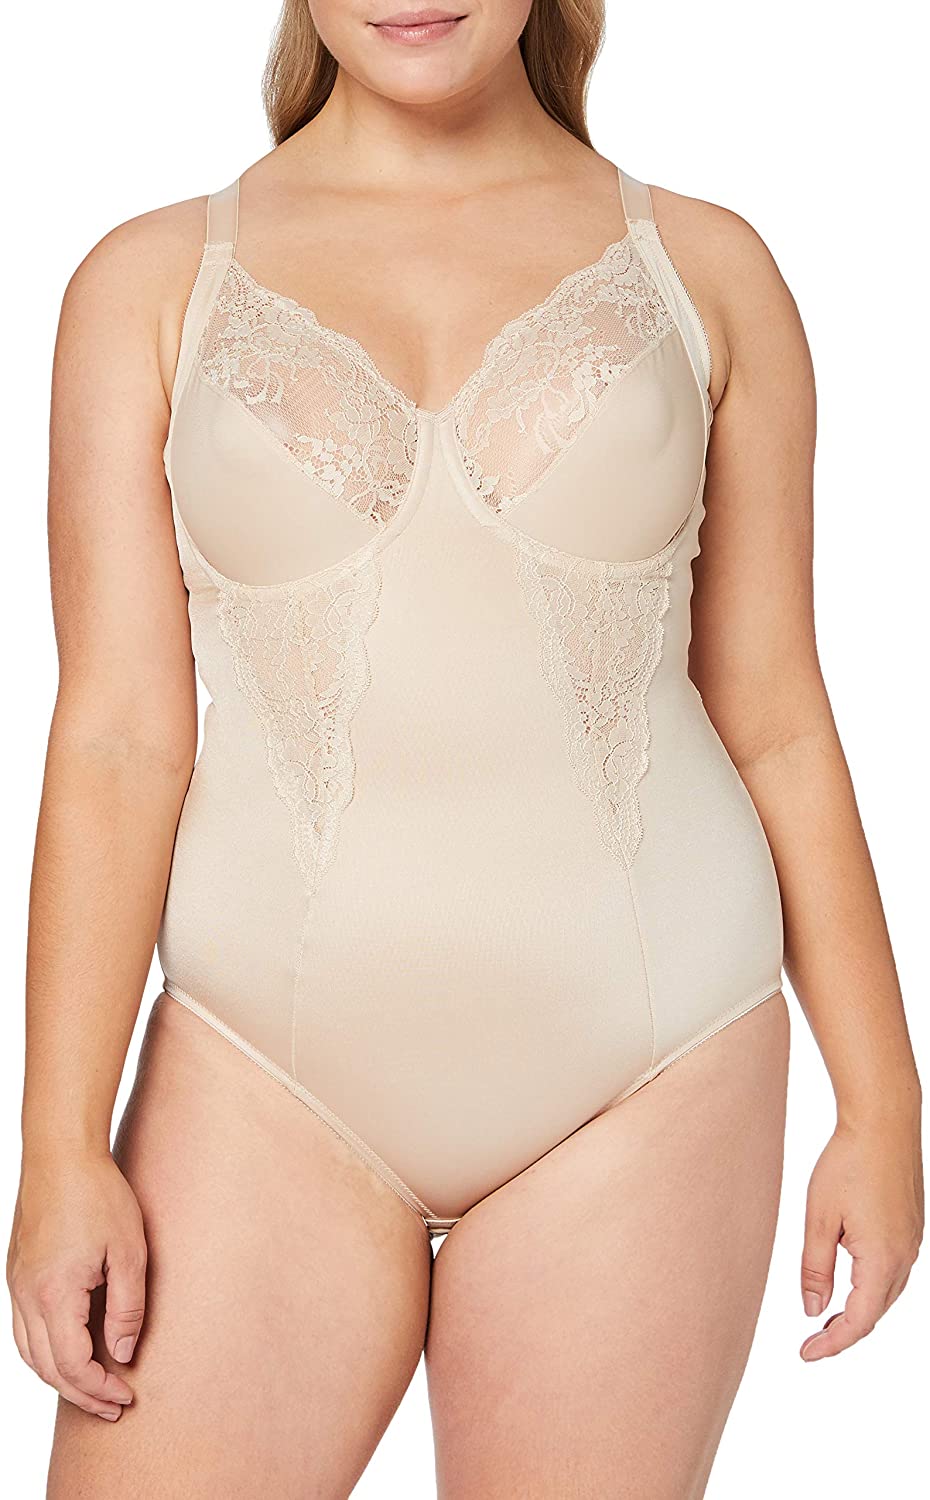 Body Briefer with Lace